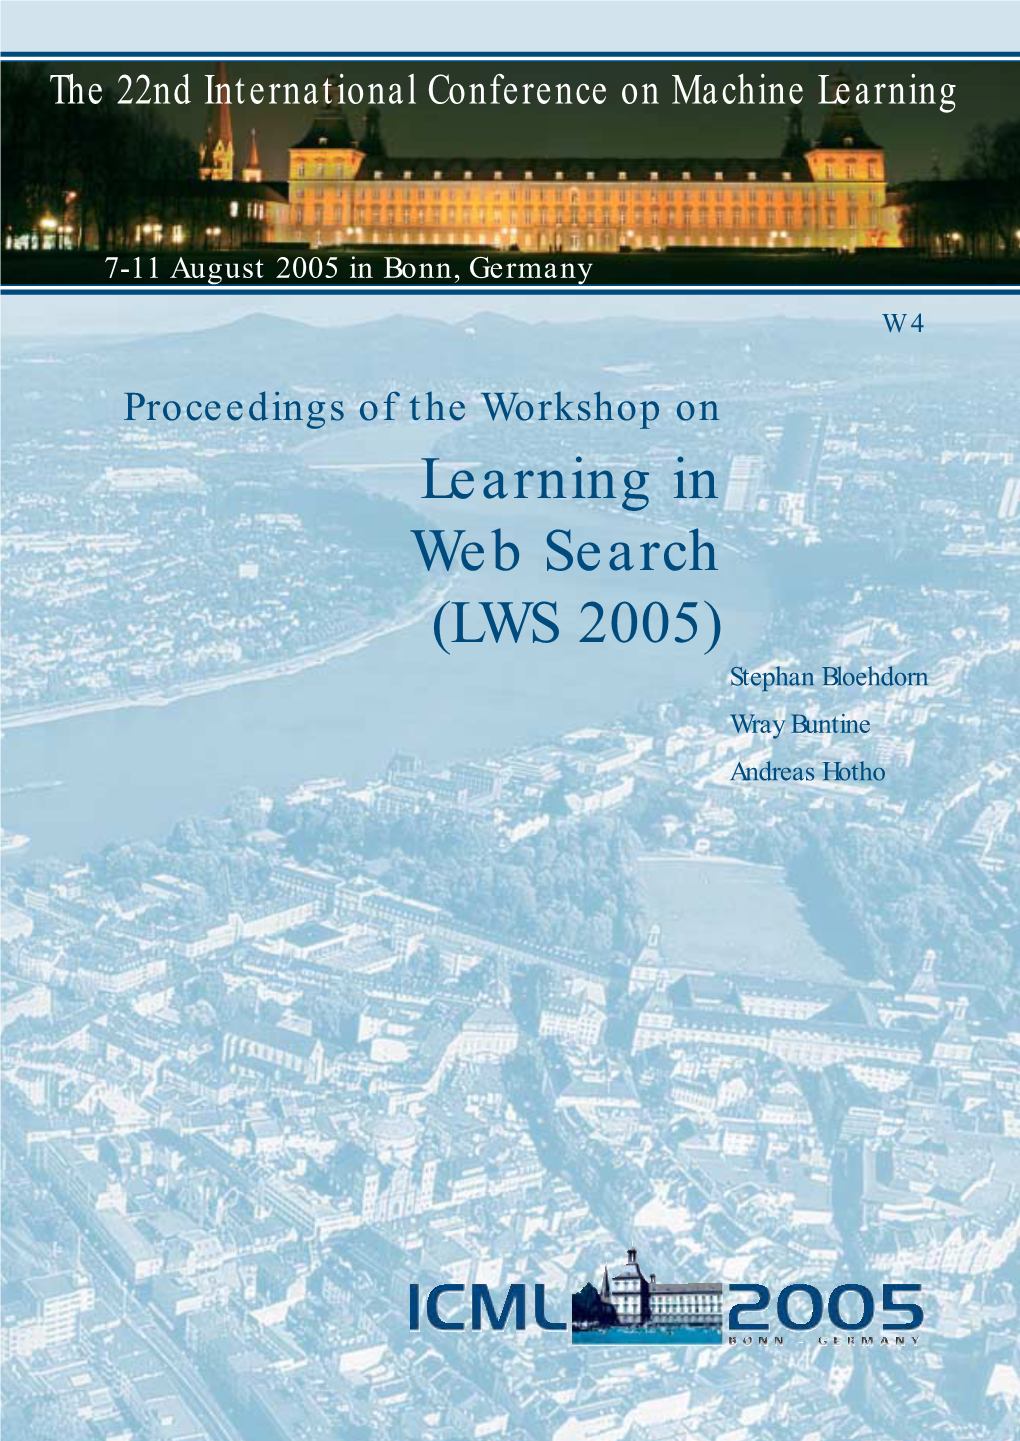 Proceedings of Learning in Web Search (LWS 2005)